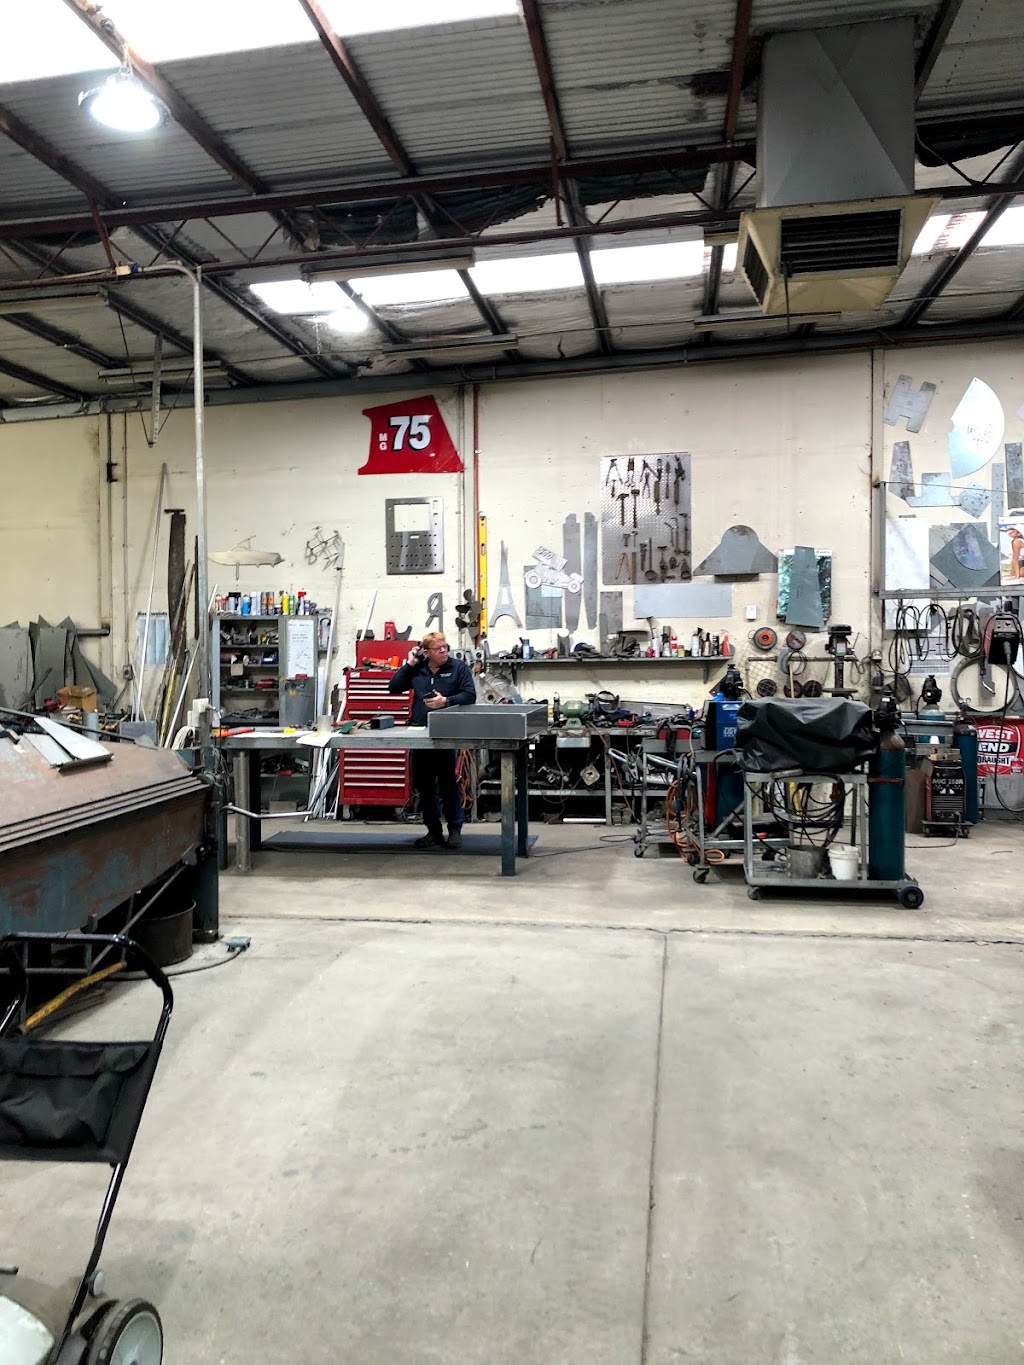 Andrew Bruhn Sheetmetal | general contractor | 23 Avey Rd, Mount Gambier SA 5290, Australia | 0887235600 OR +61 8 8723 5600